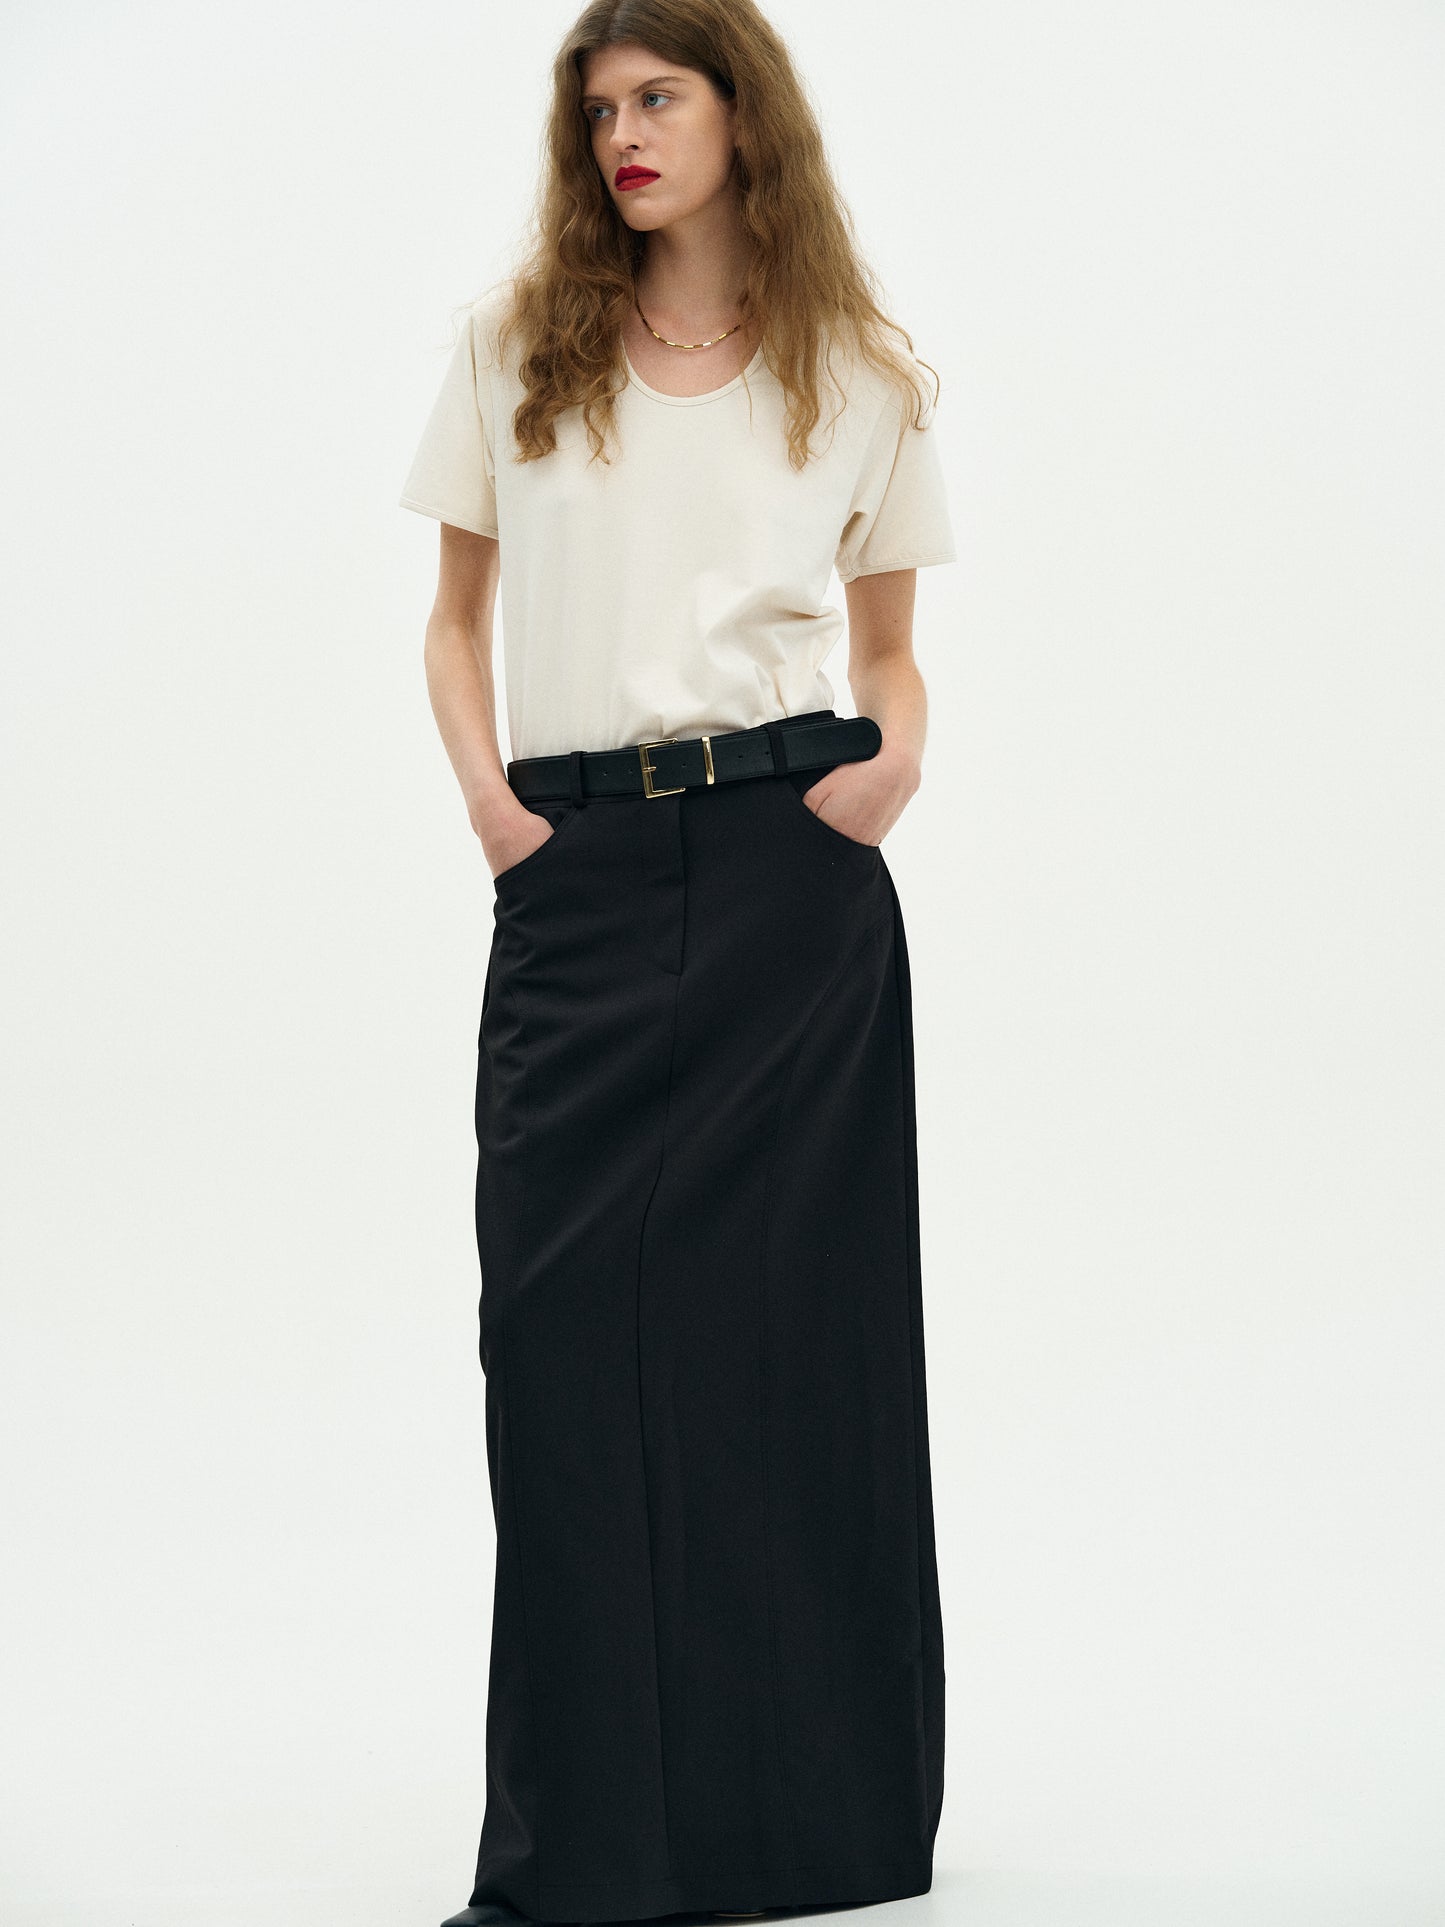 The Long Straight Skirt: A Staple for All Occasions